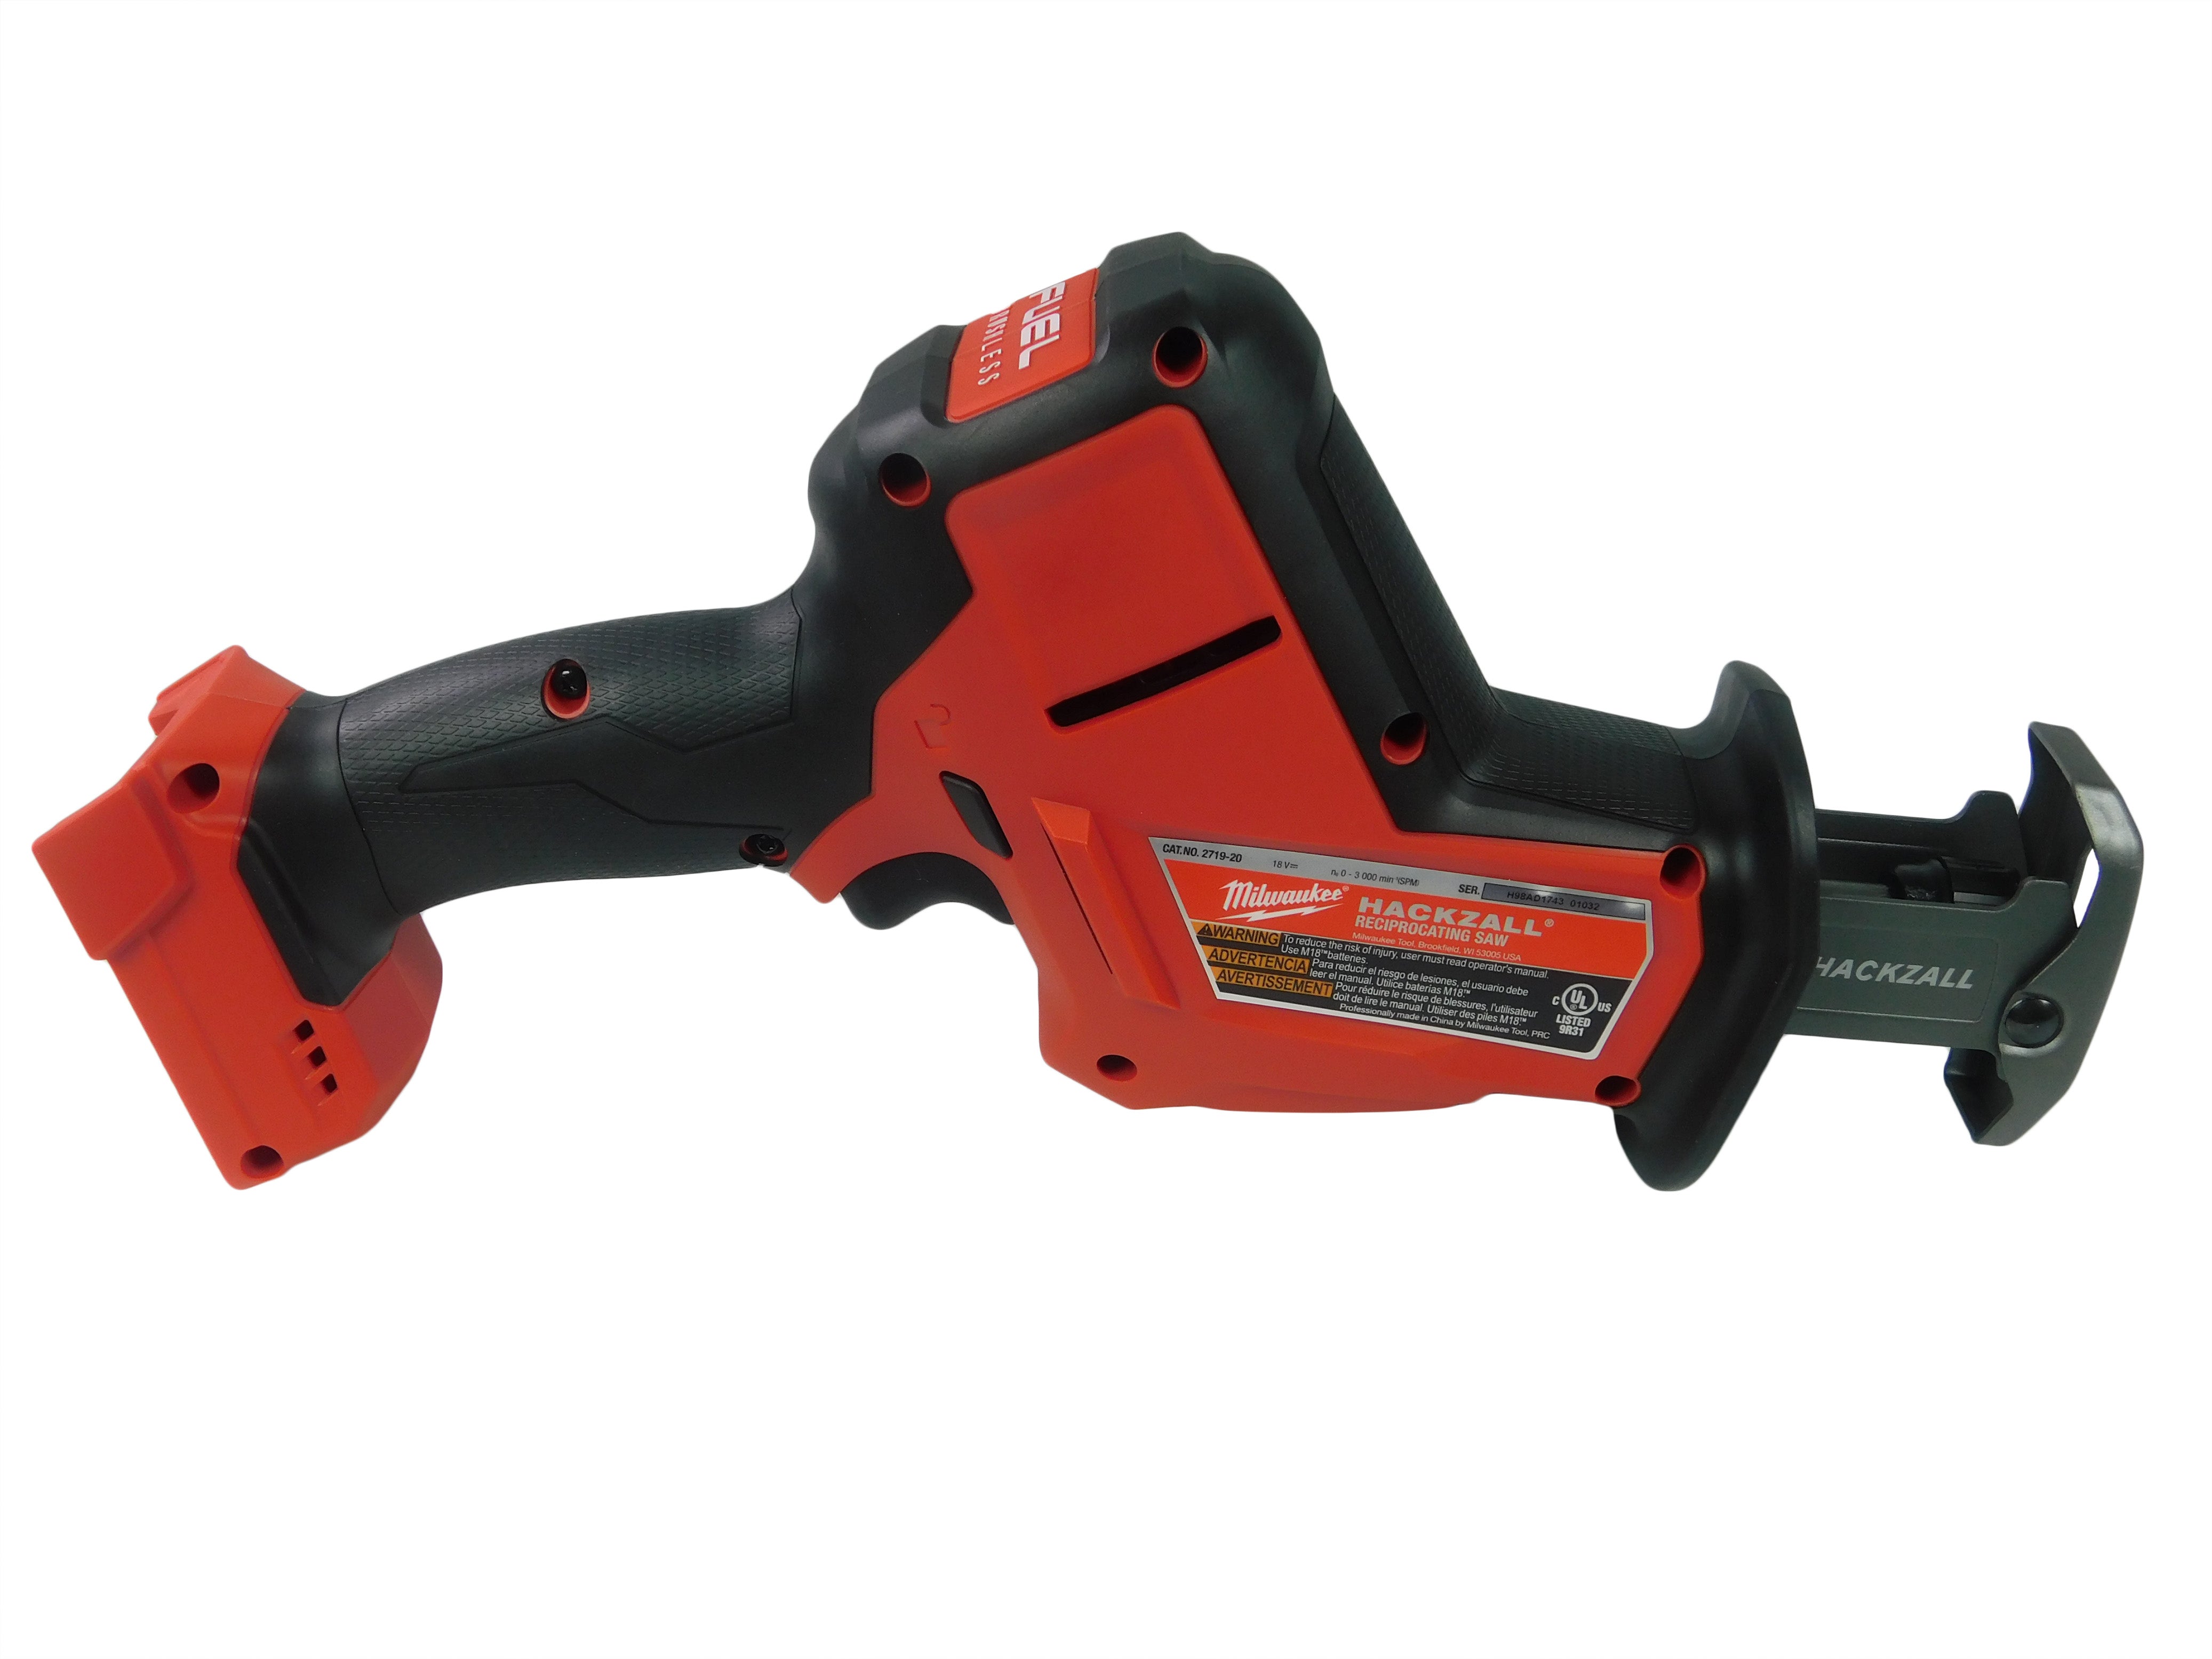 Milwaukee 2719-20 M18 FUEL 18V HACKZALL Reciprocating Saw (Tool Only)